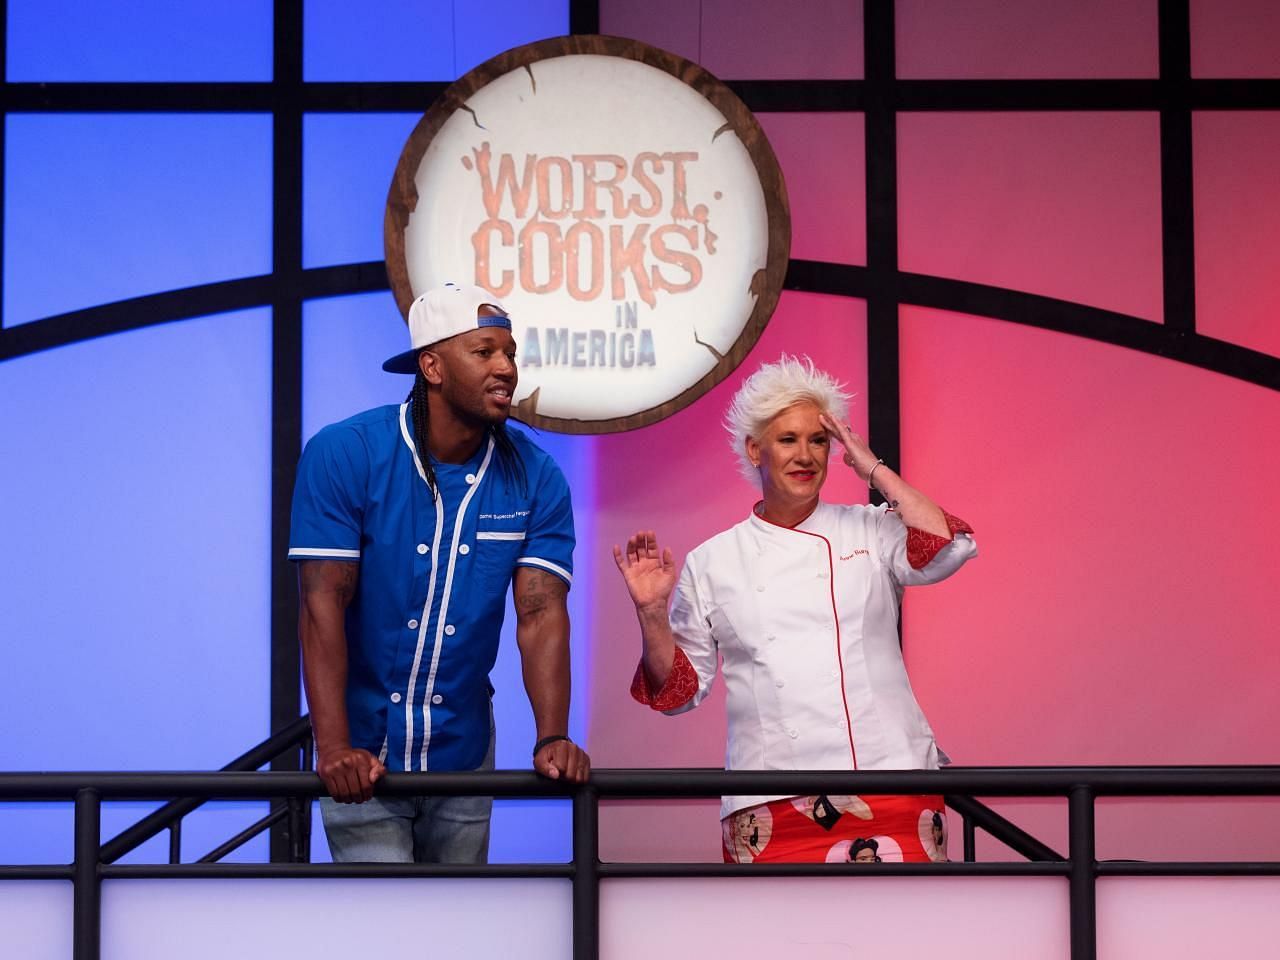 The new season of Worst Cooks In America is all set to premiere on January 1, 2023. (Image via Pinterest)